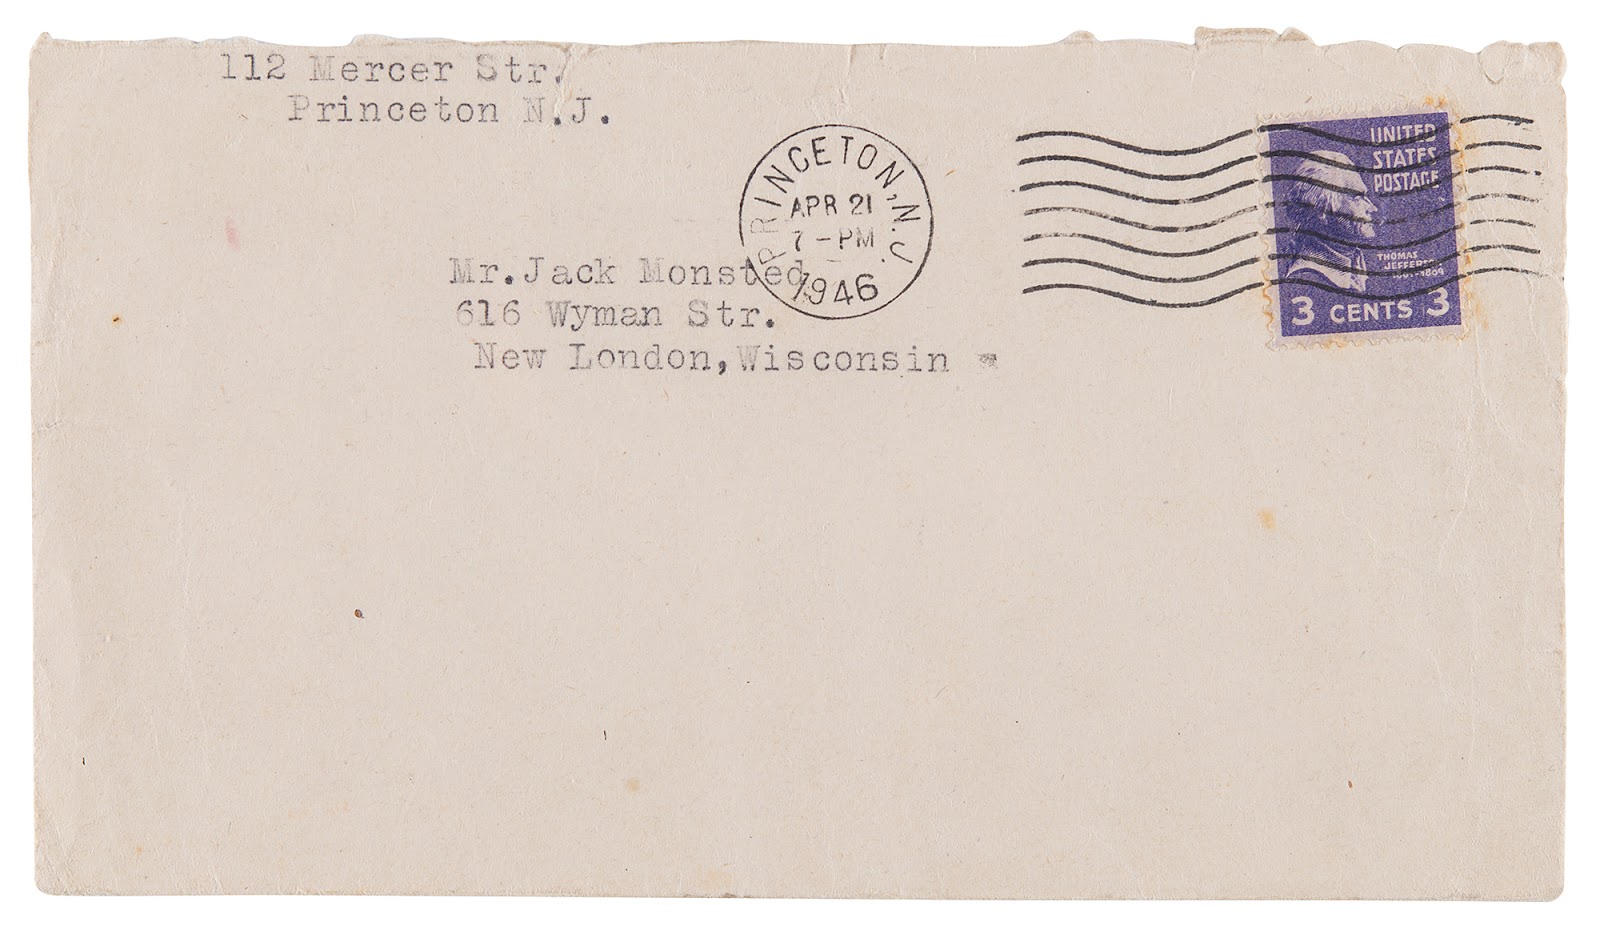 The original envelope Einstein sent his letter to Jack Monsted in, postmarked with a Princeton stamp.